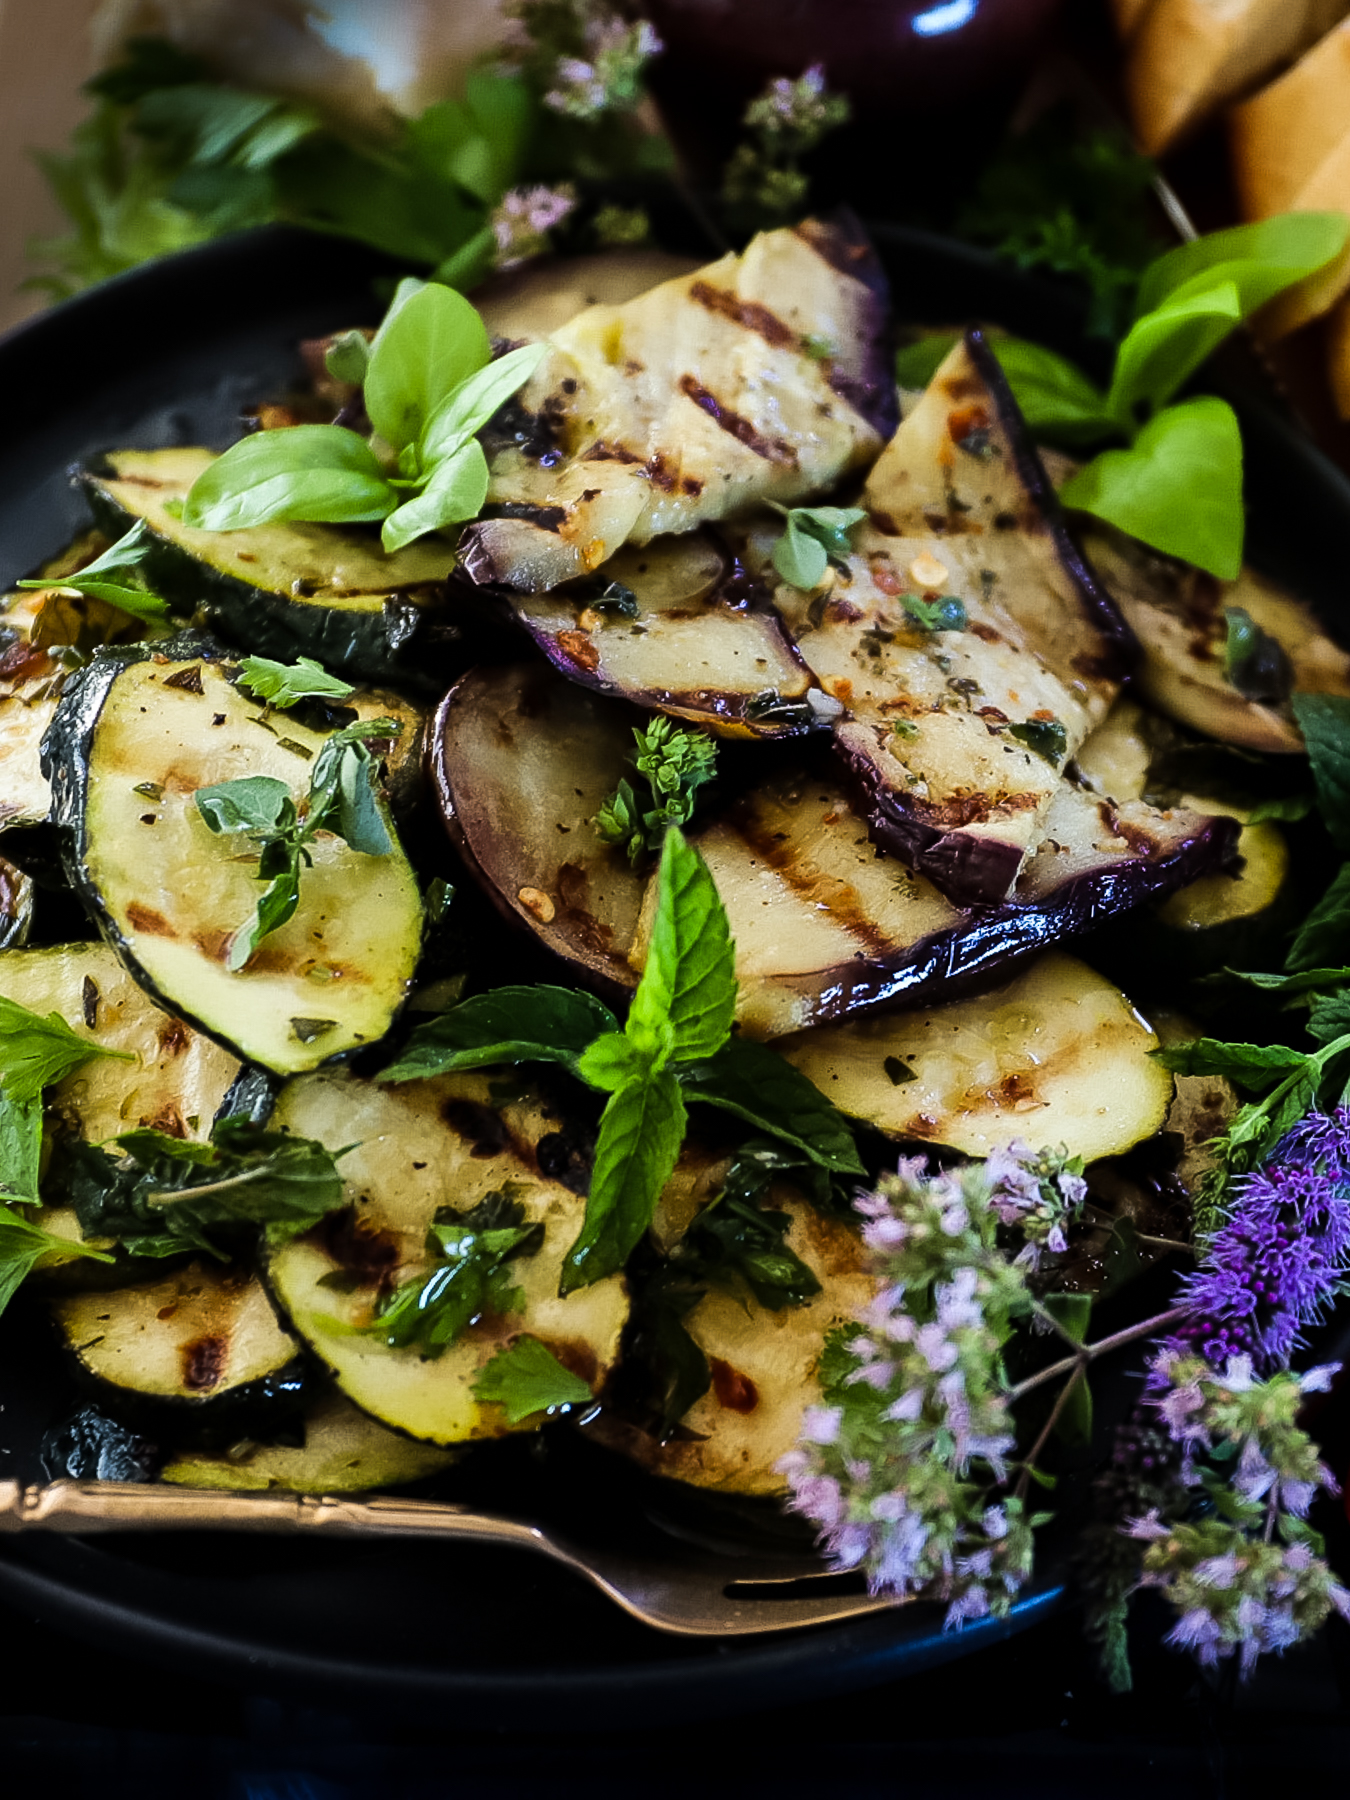 Close up of grilled zucchini and eggplant with grill marks on each and flowering oregano and mint leaves garnishing it.